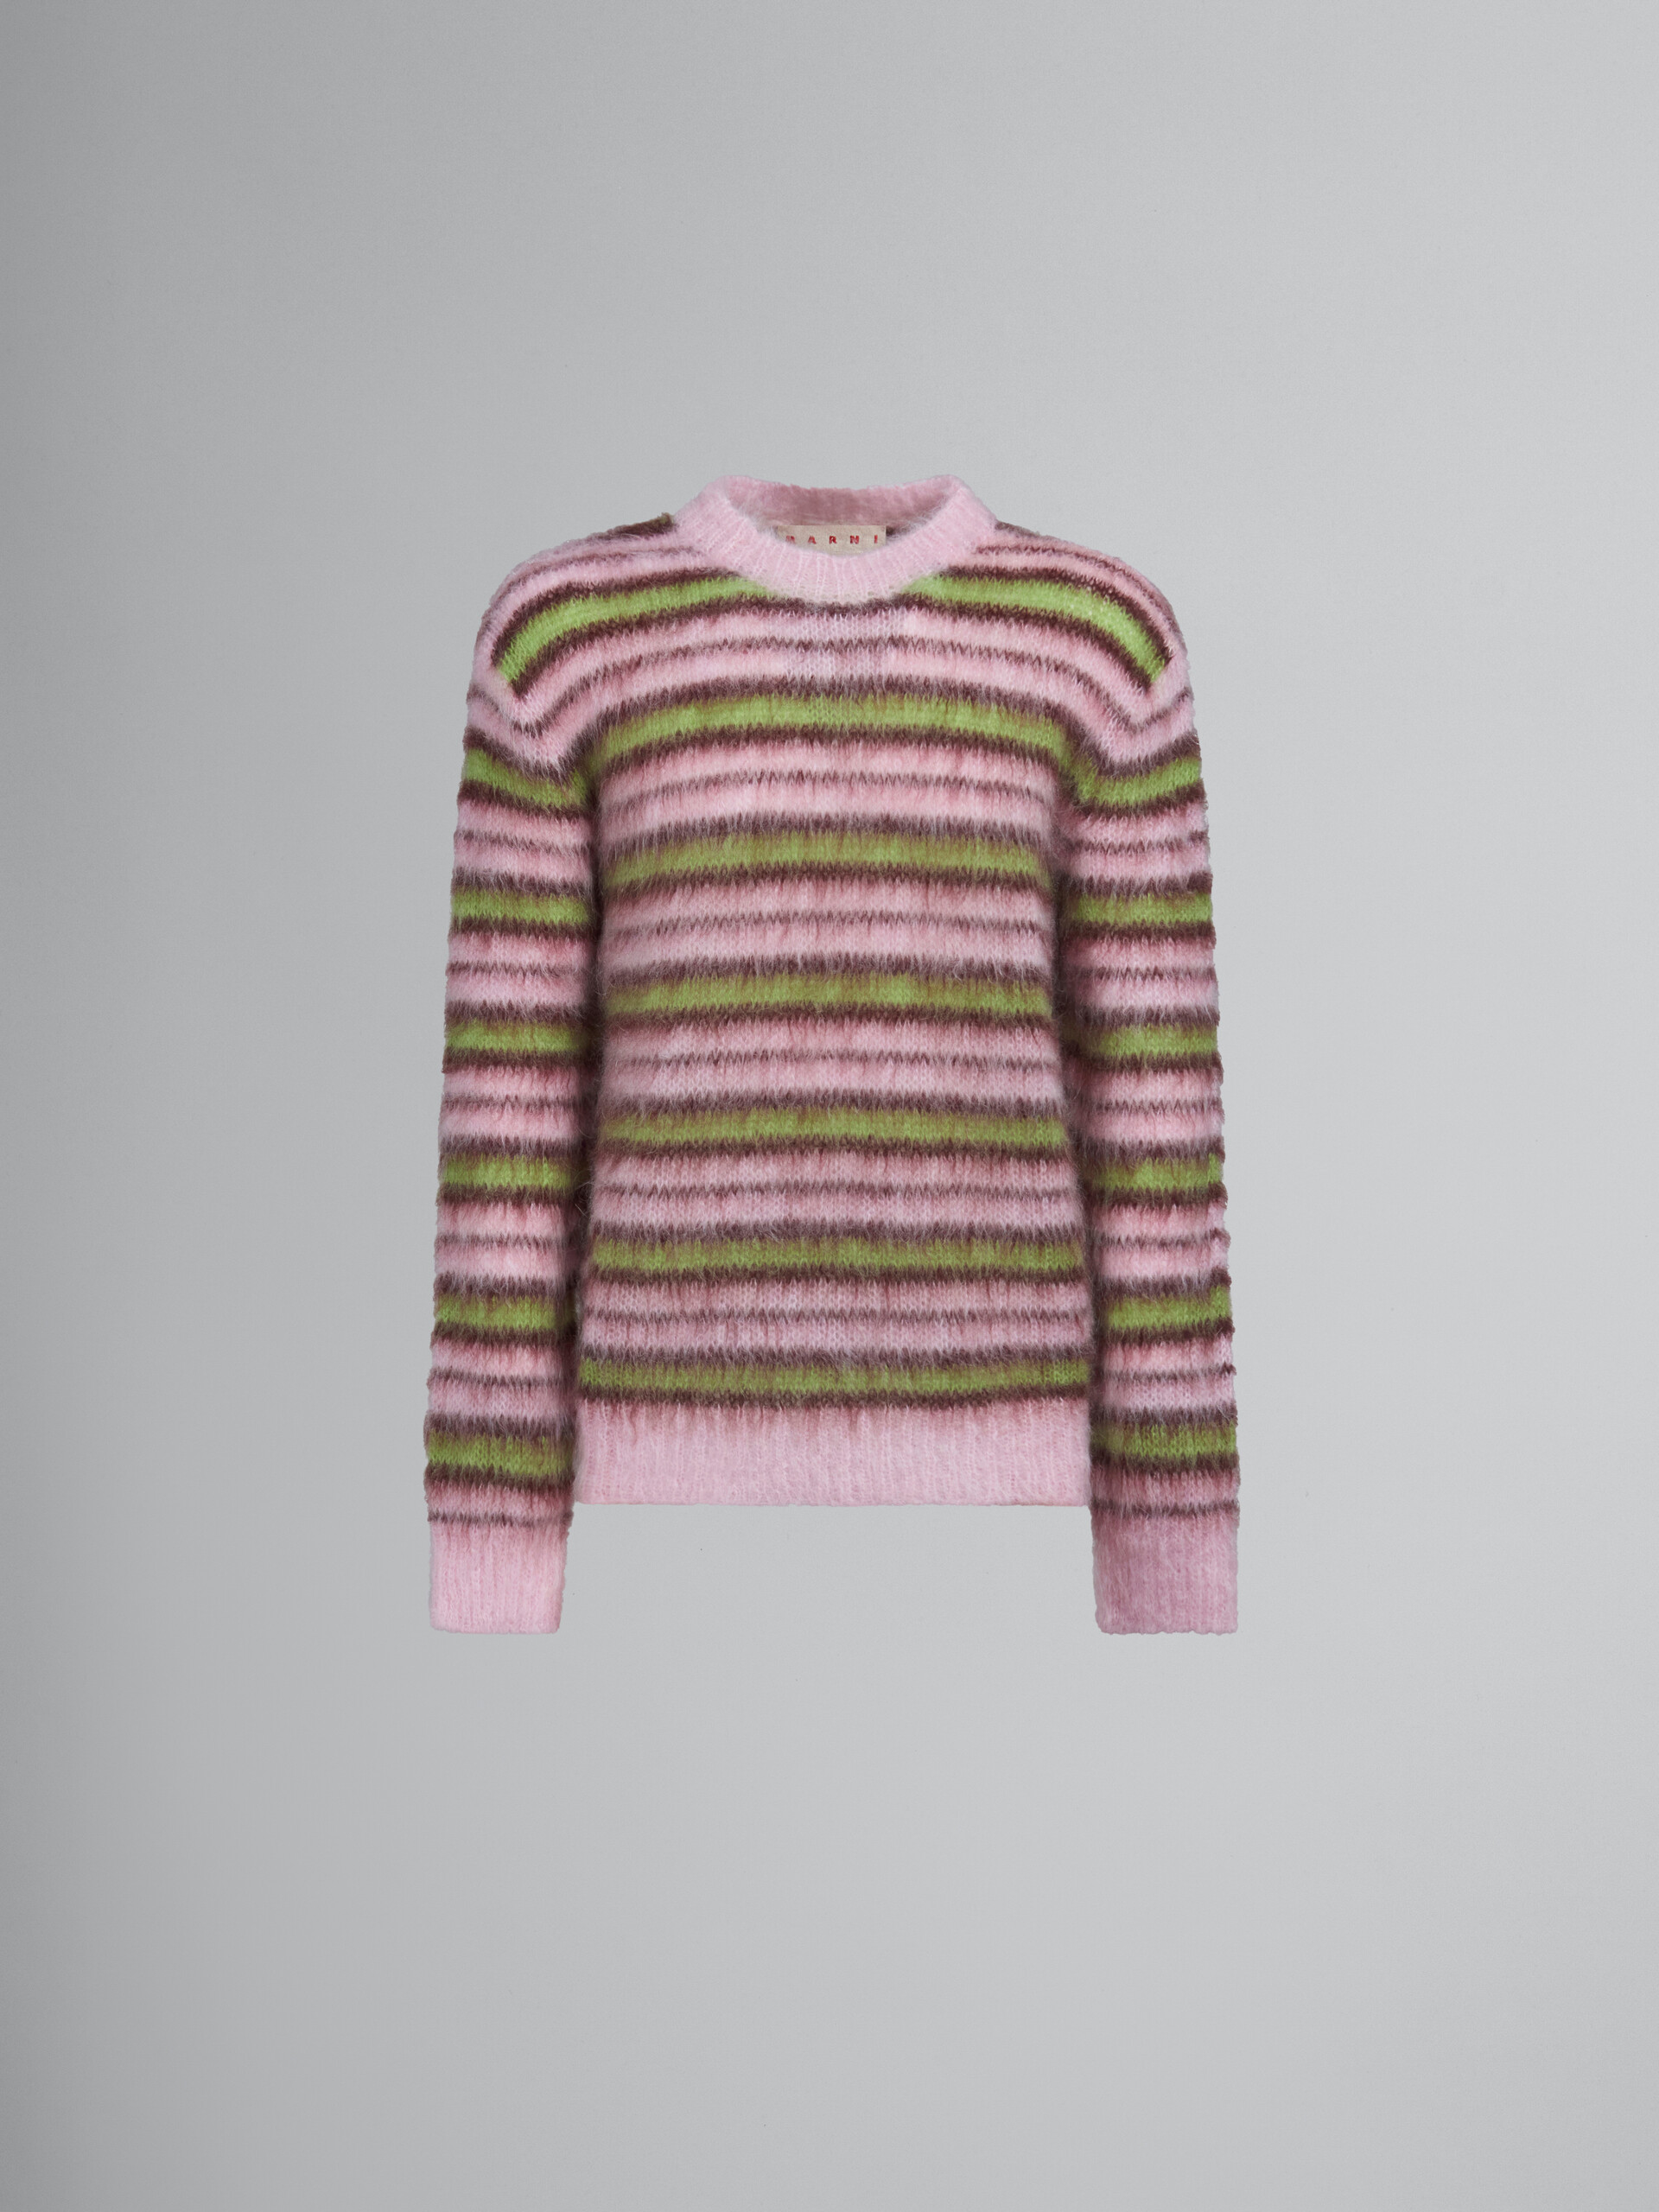 Pink striped mohair sweater - Pullovers - Image 1